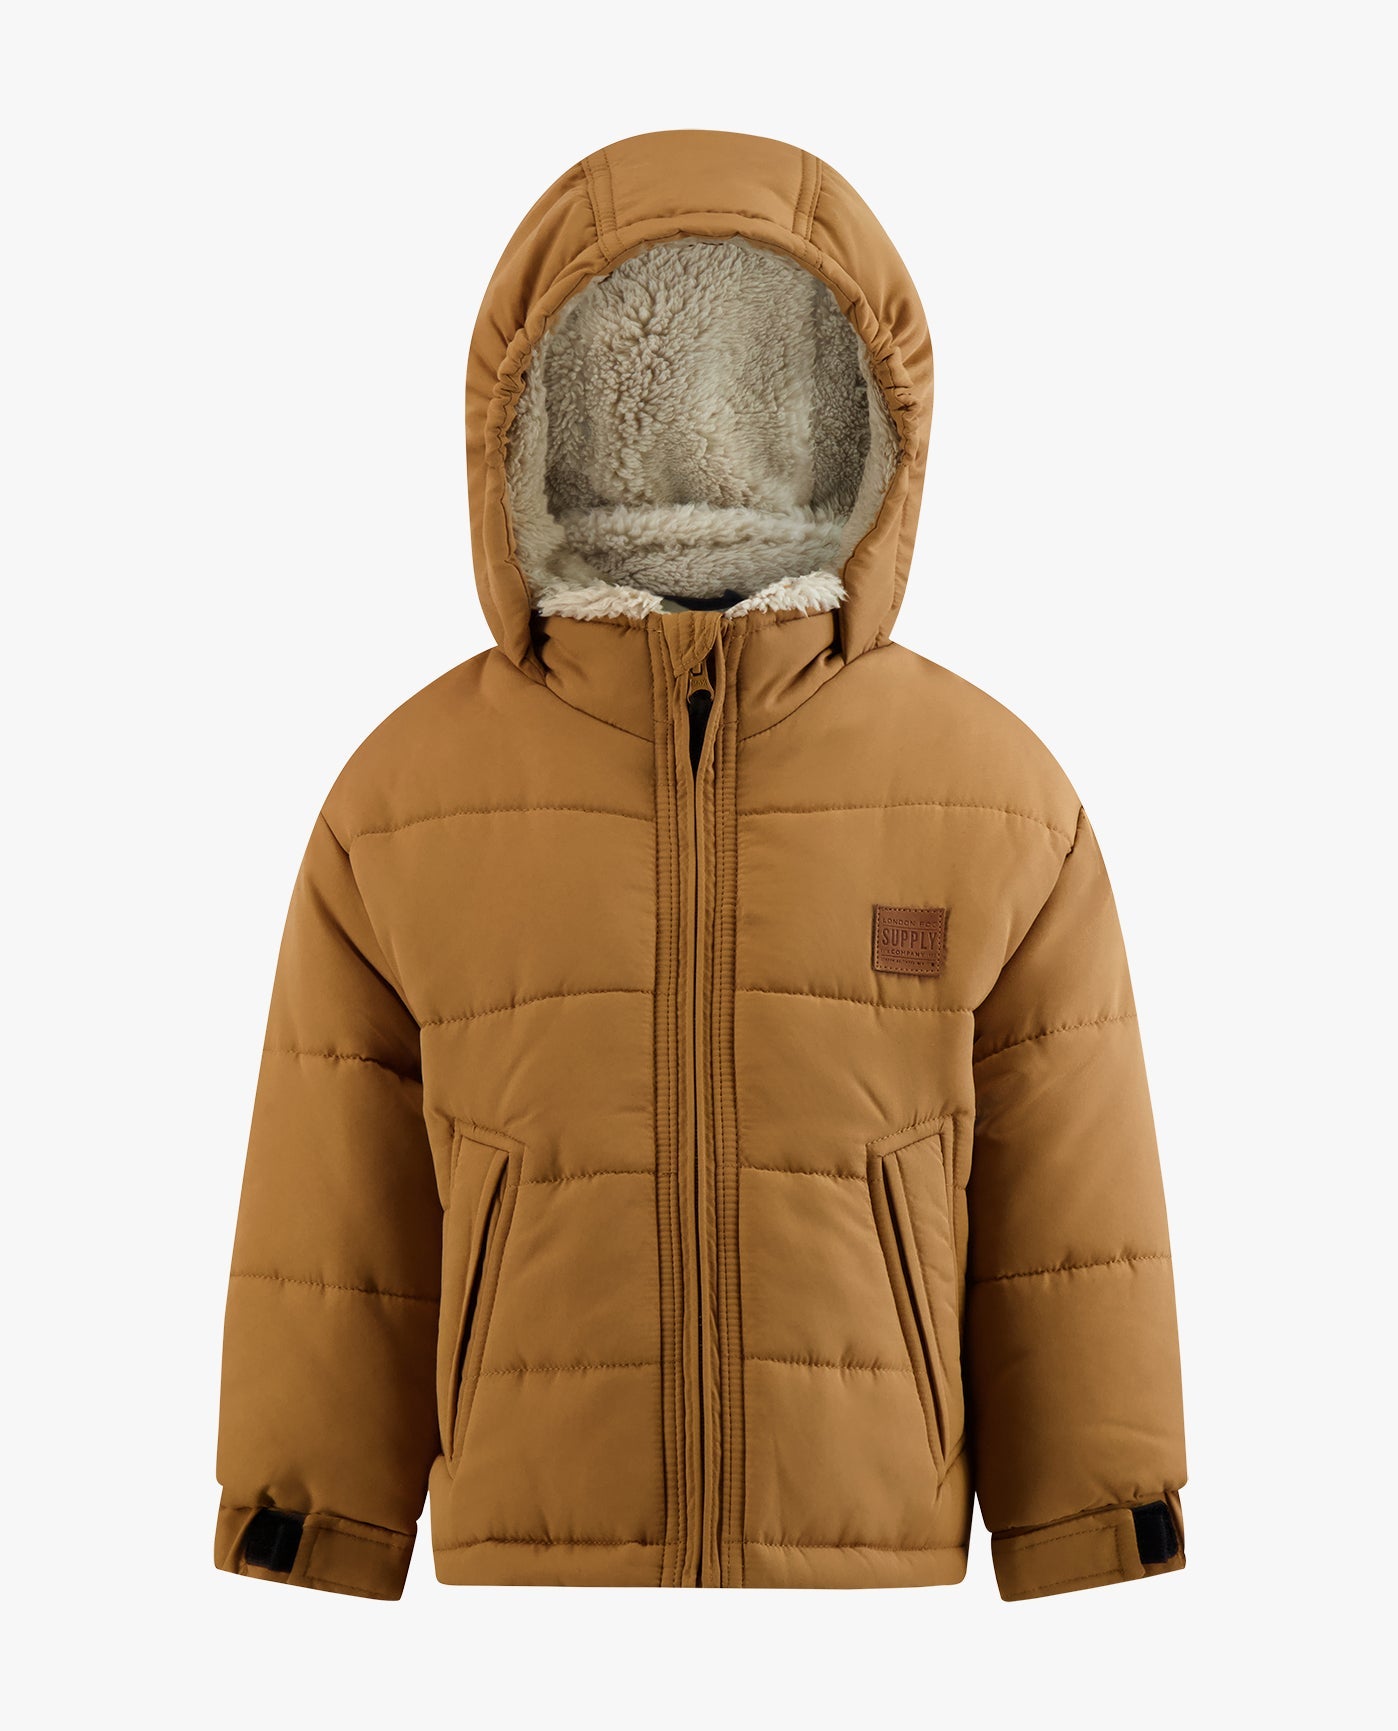 Detail View Of TODDLER BOYS ZIP-FRONT HOODED SHERPA LINED PUFFER | TAN